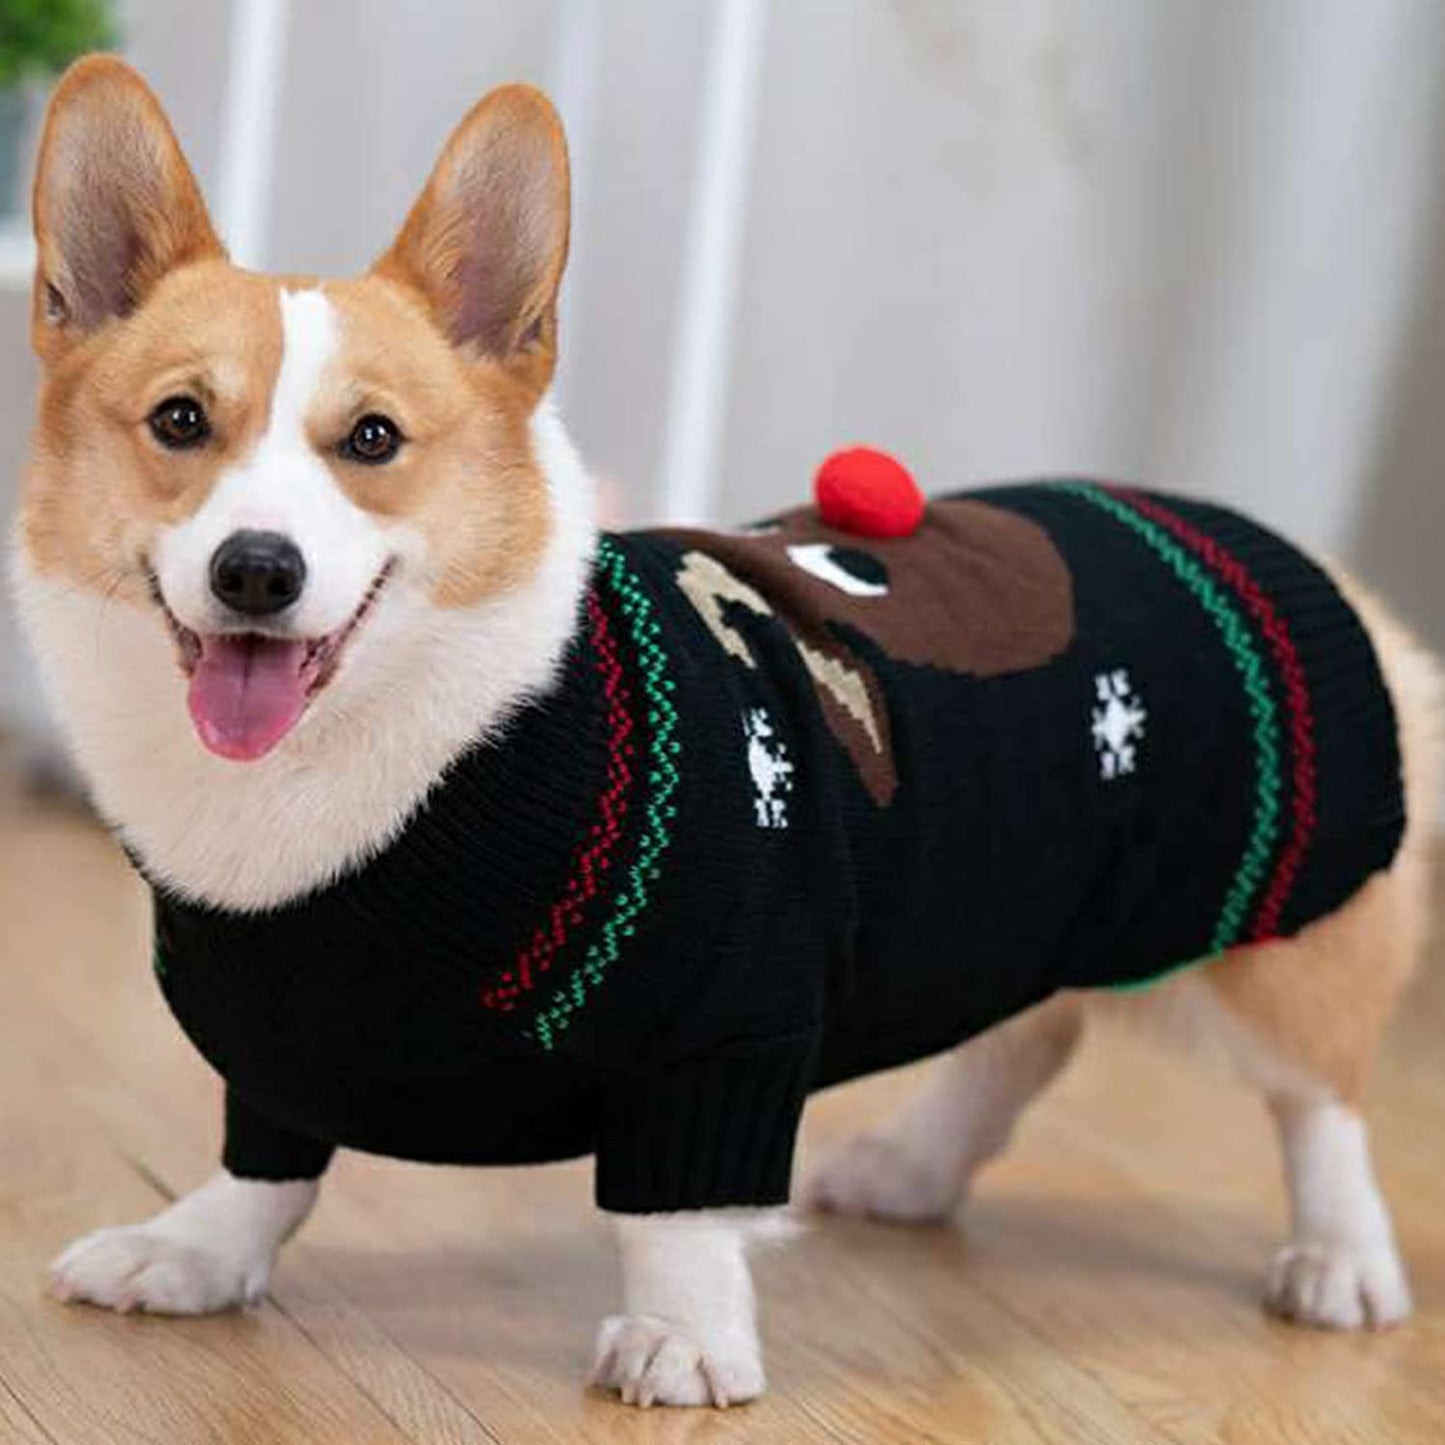 TENGZHI Dog Christmas Sweater Ugly Xmas Puppy Clothes Costume Warm Knitted Cat Outfit Jumper Cute Reindeer Pet Clothing for Small Medium Large Dogs Cats（S,Black）